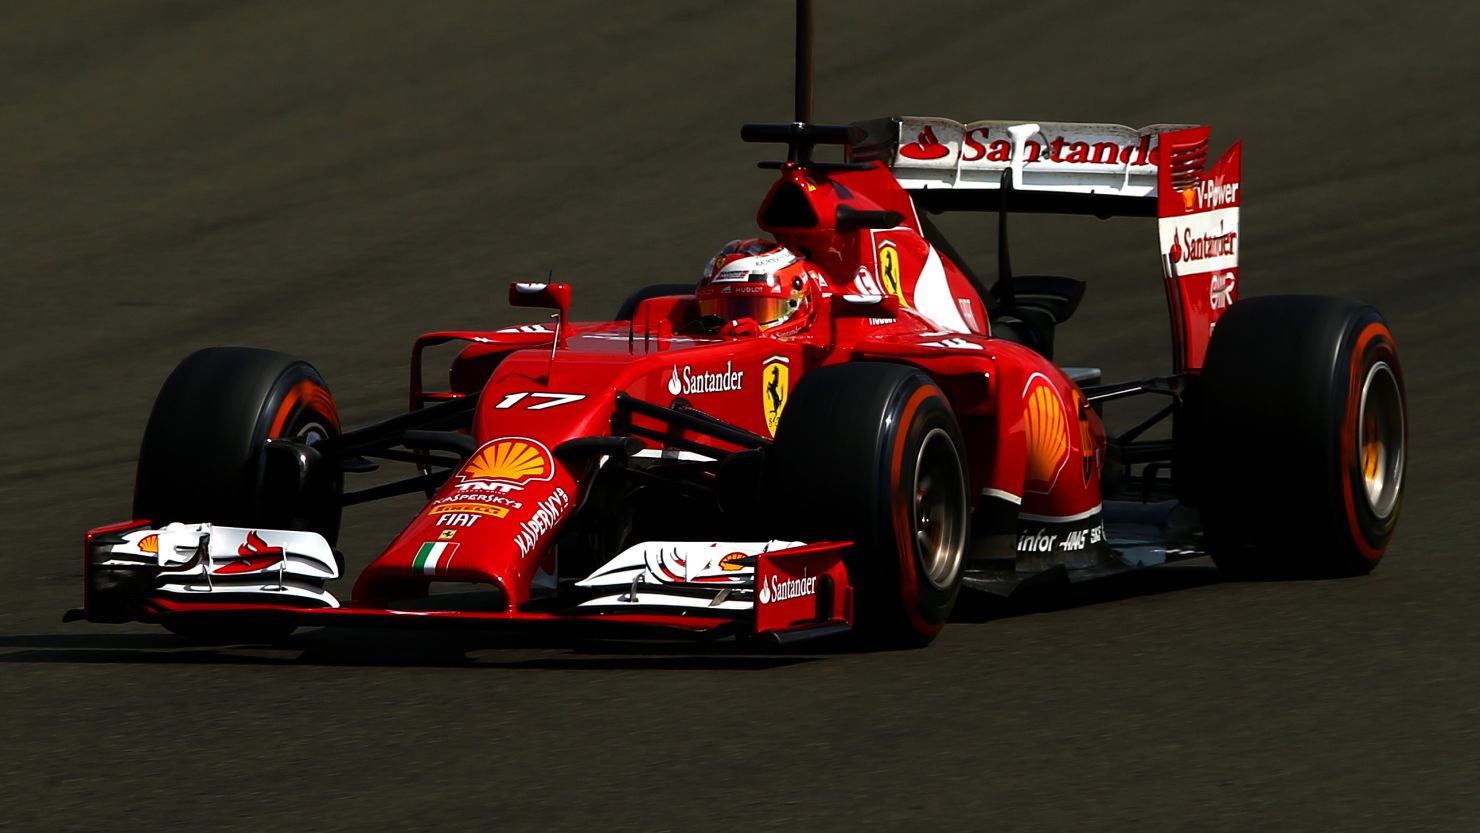 Jules Bianchi drives a Ferrari during day two of testing at Silverstone Circuit on Wednesday in Northampton, England.